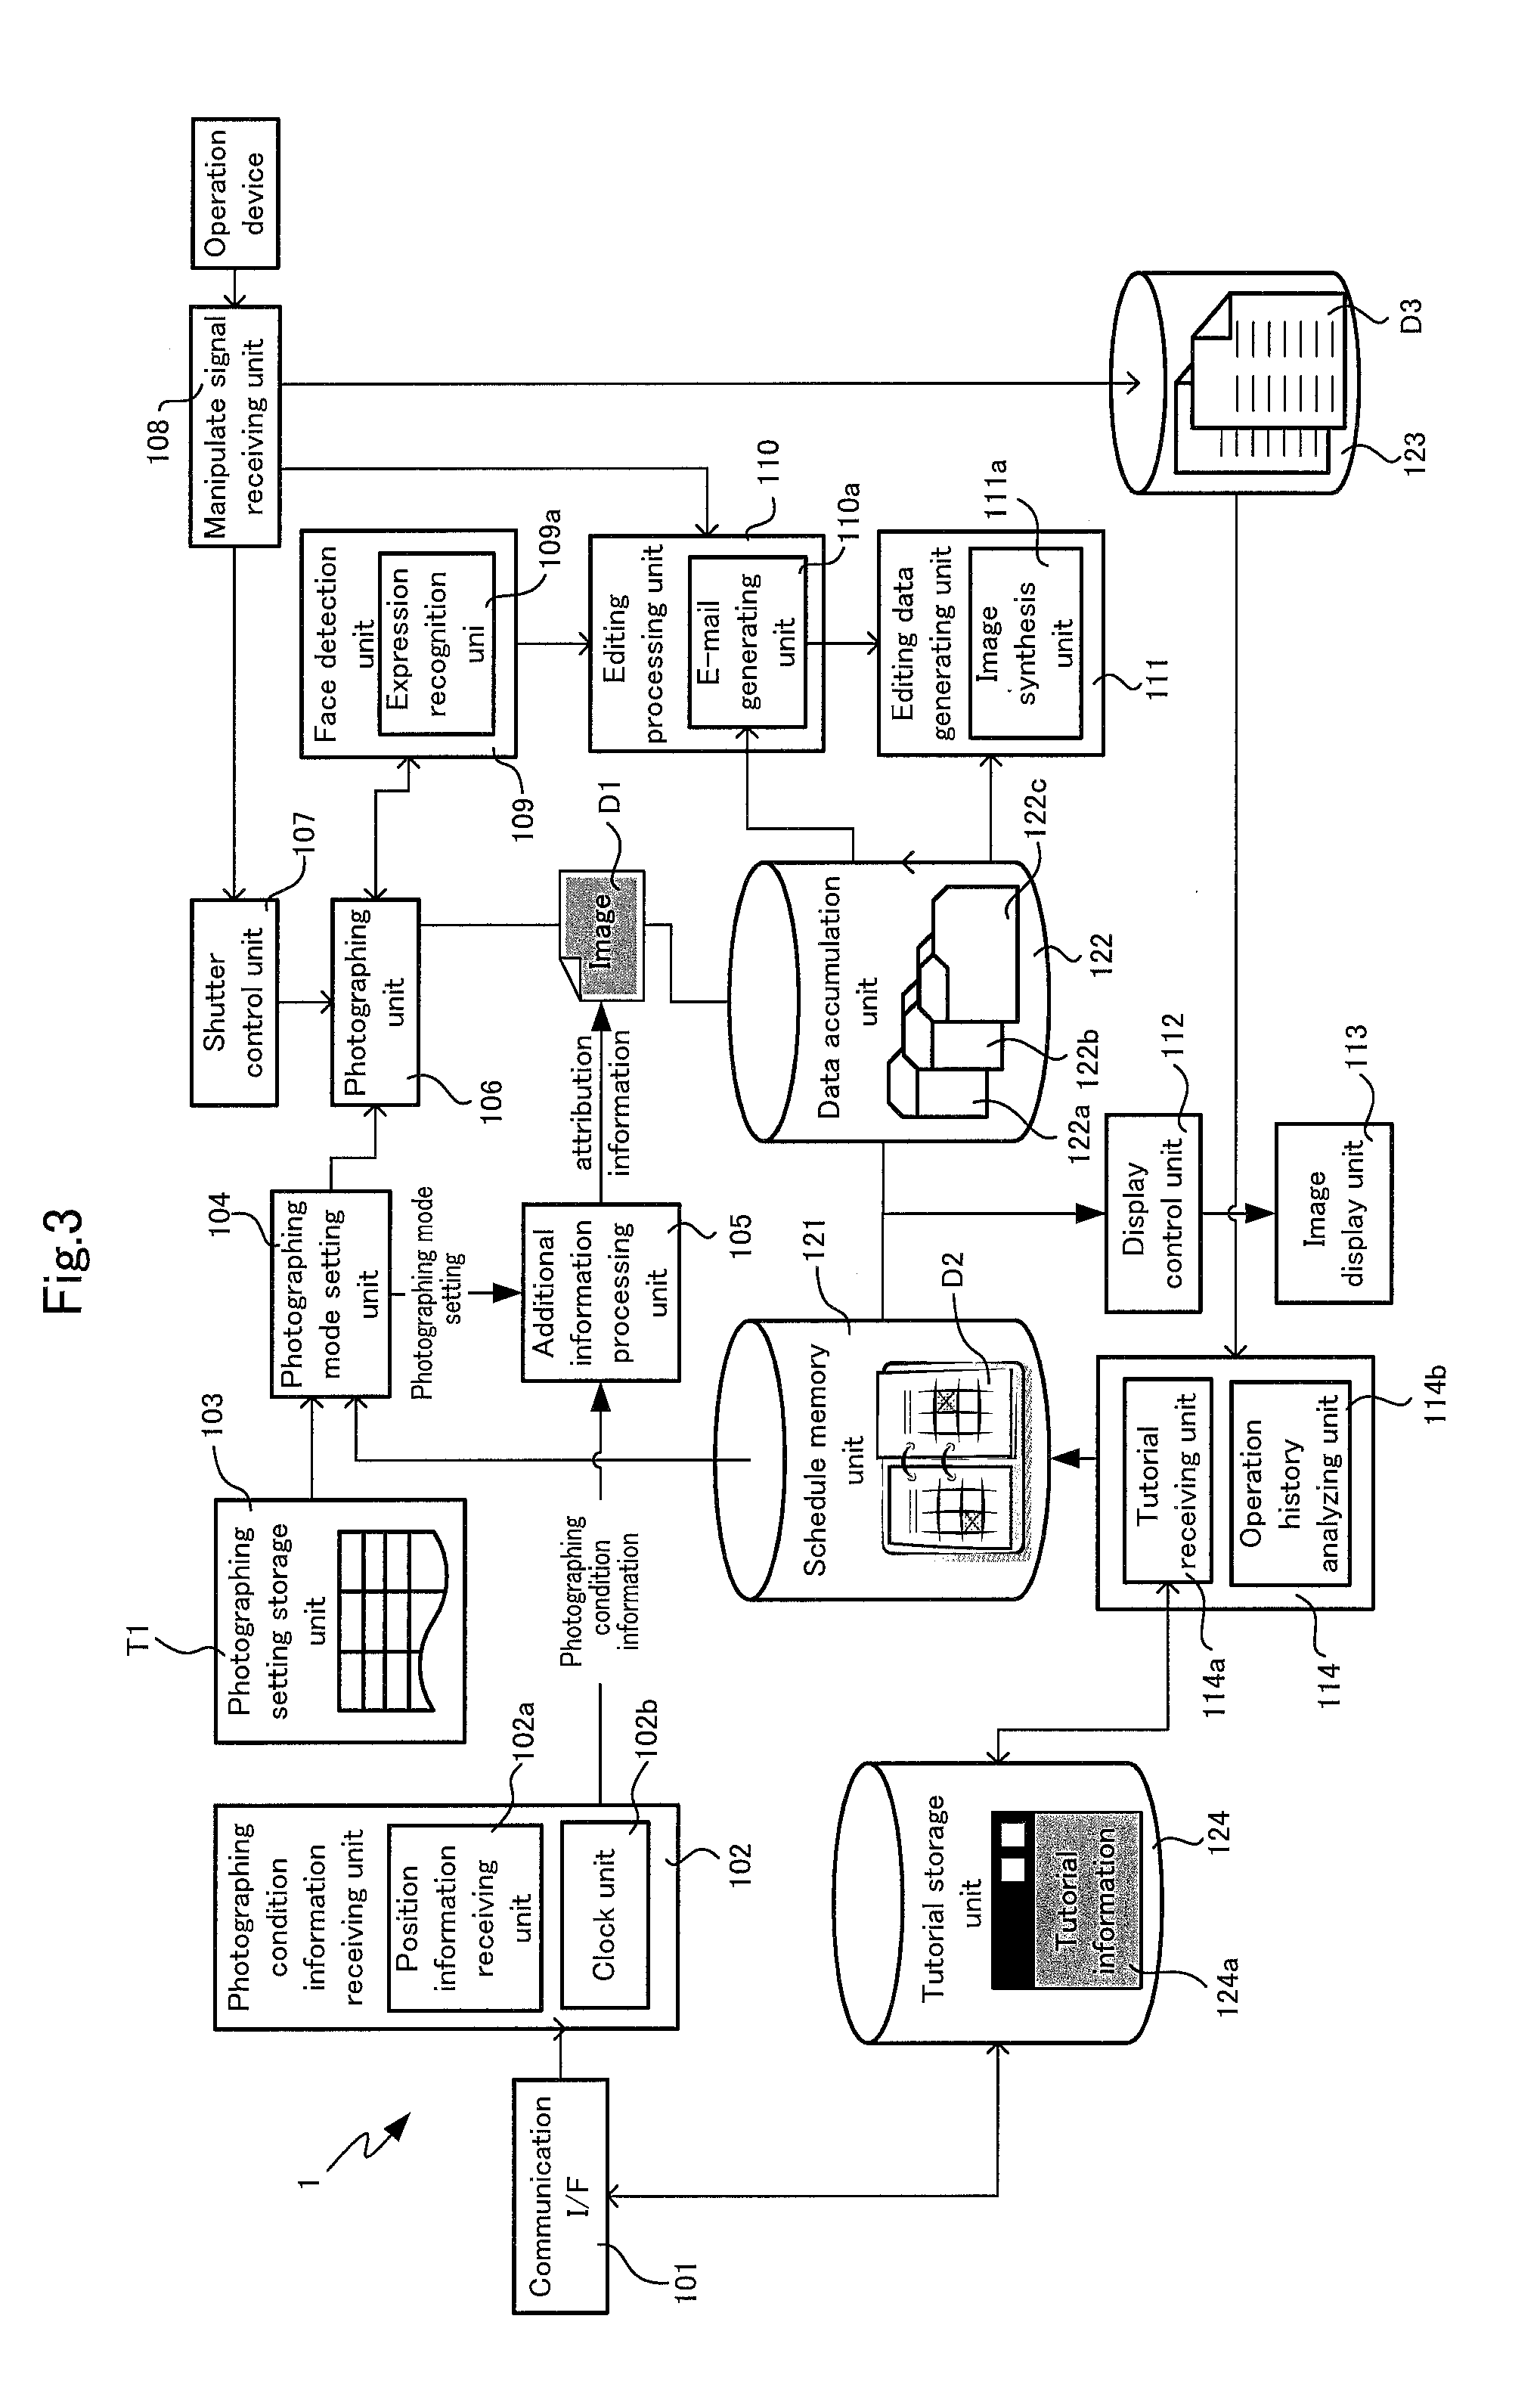 Image photographing system and image photographing method